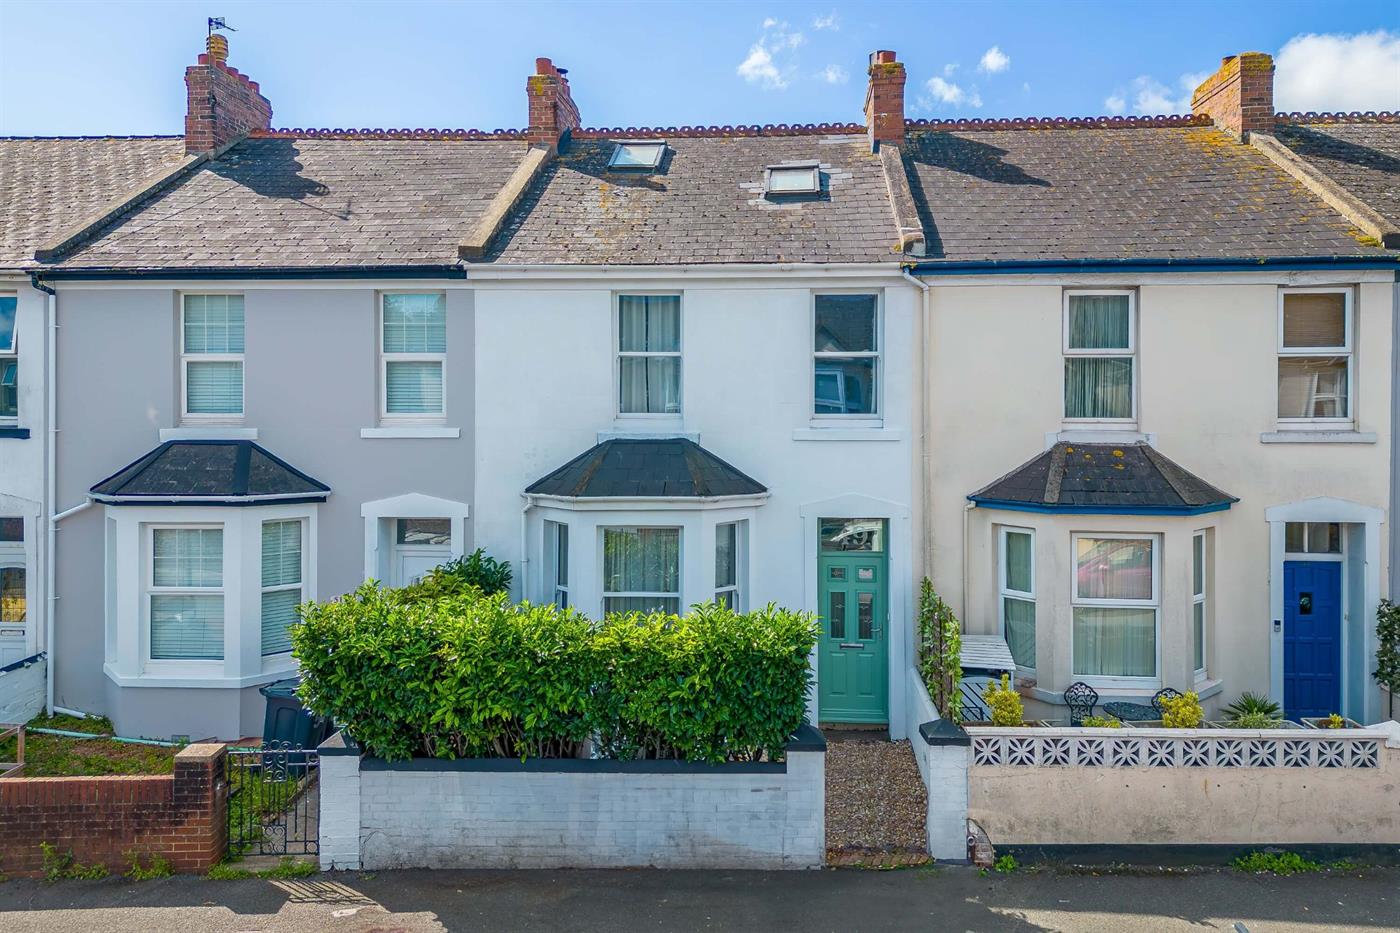 3 Bedroom Terraced House for Sale: Warbro Road, Babbacombe, Torquay, TQ1 3PP